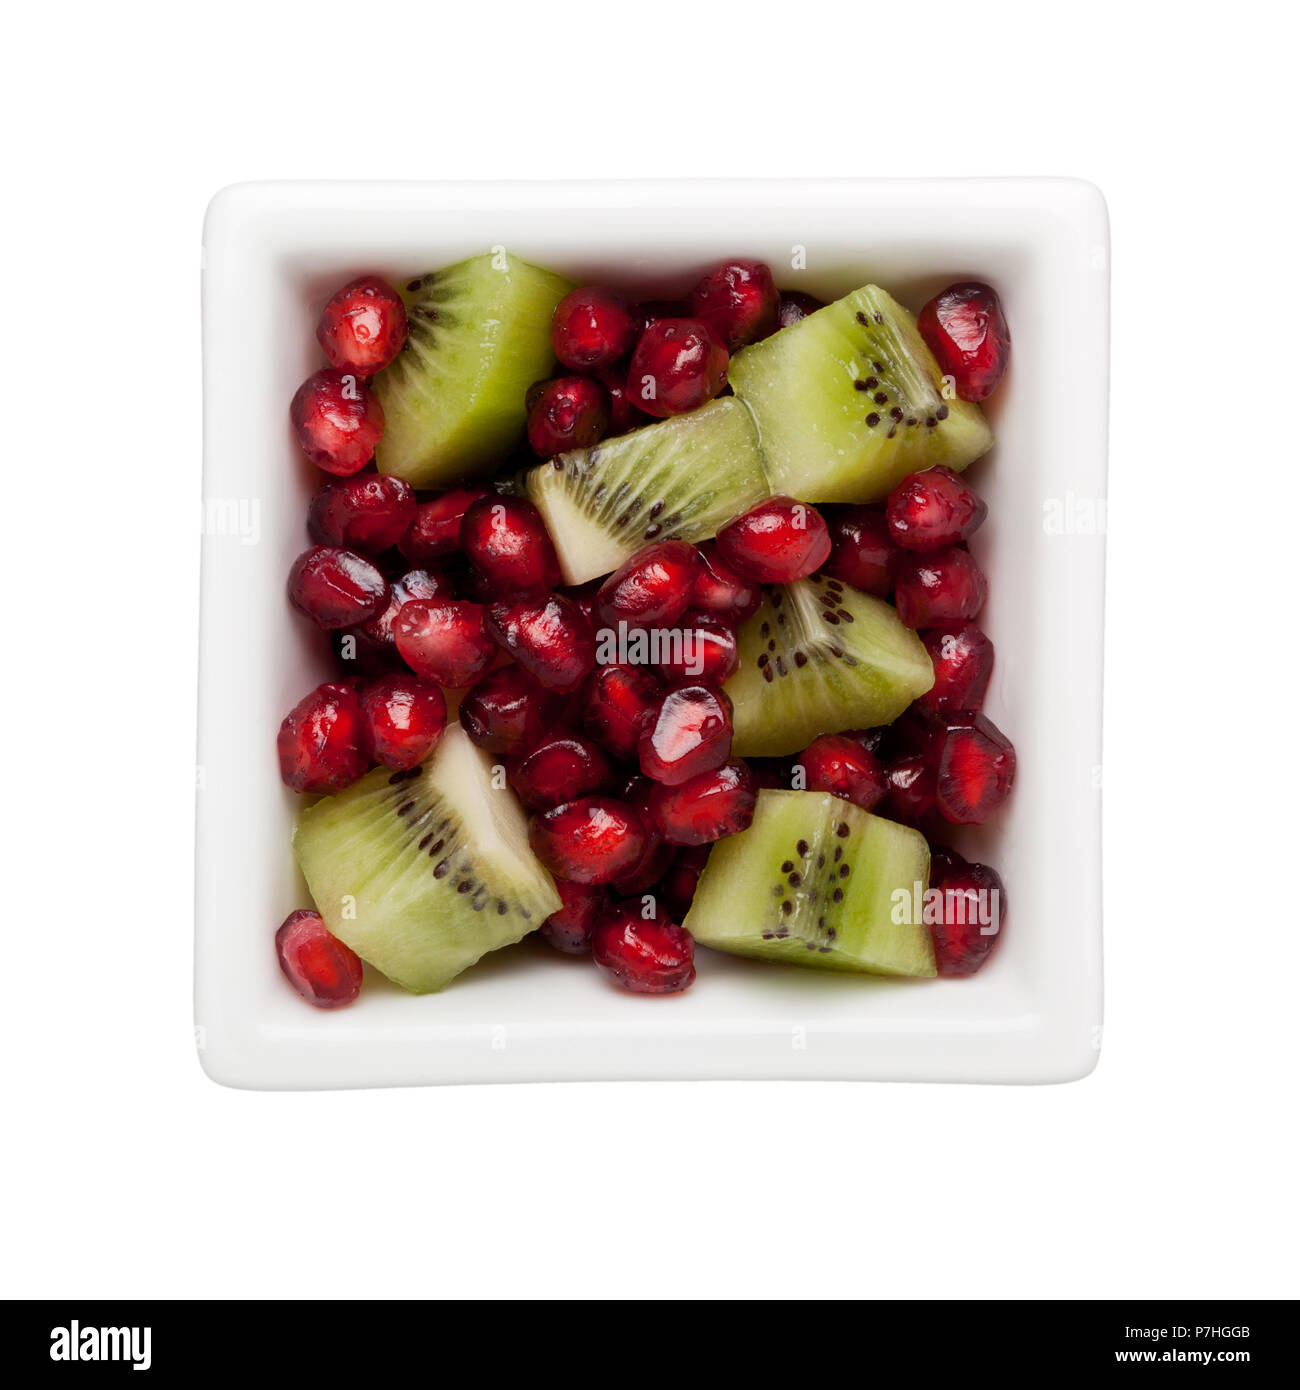 Pomegranate arils and diced kiwifruit in a square bowl isolated on white background Stock Photo